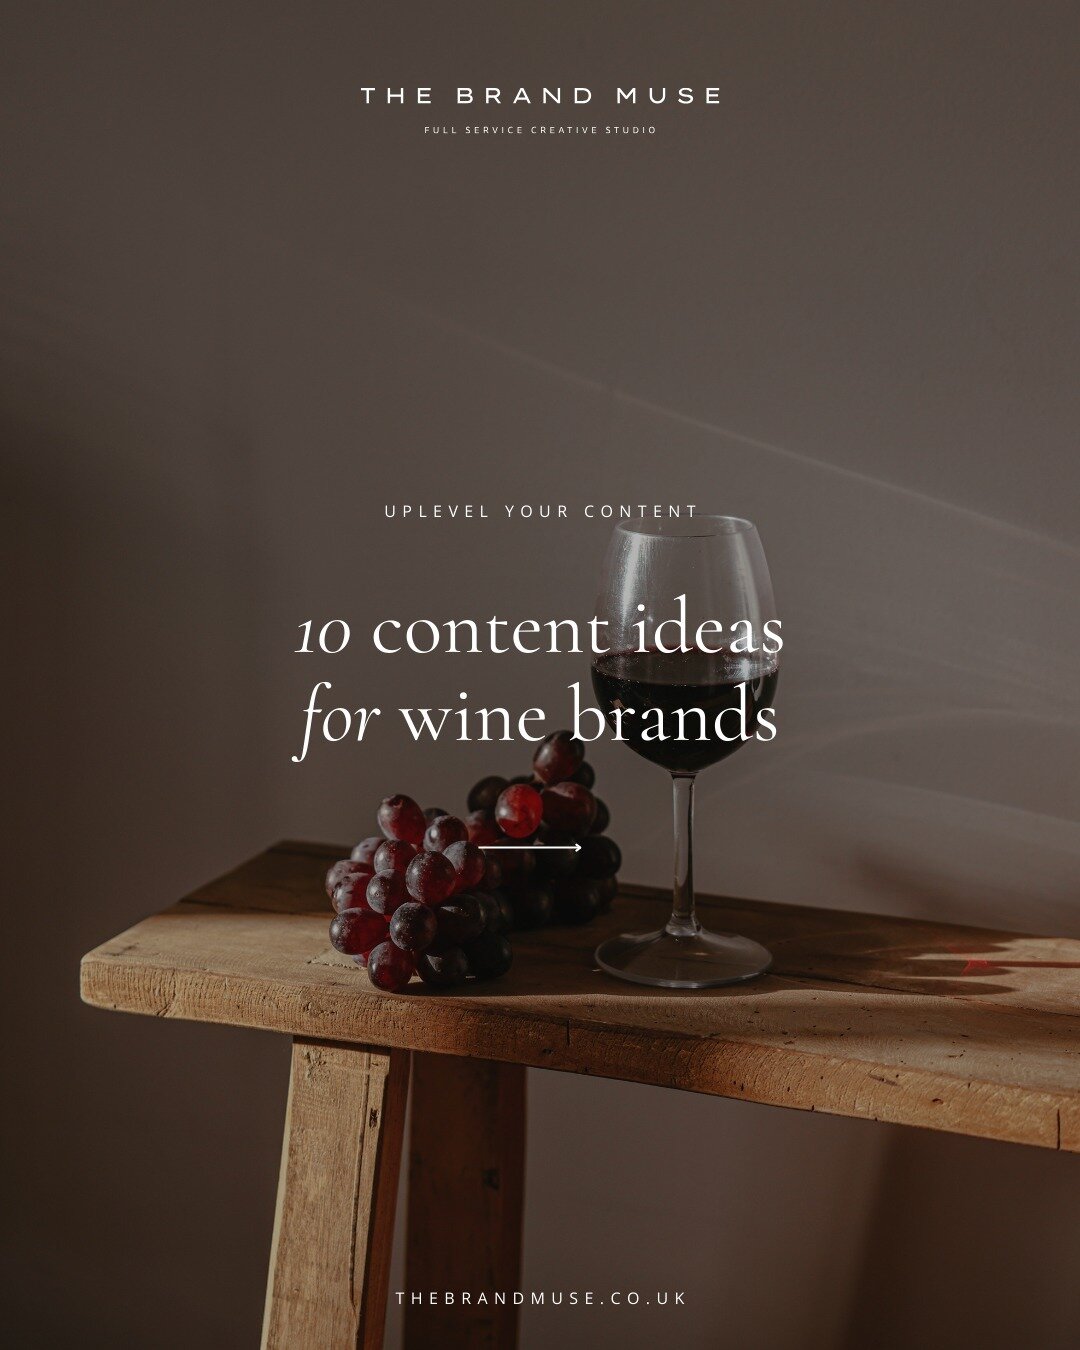 CONTENT IDEAS SERIES 5 OF 10 // Vintage Vibes &amp; Spirited Stories 🍷🌿⁠
⁠
As we're gearing up for our French adventure in June, we're raising a glass to all the wine and drinks brands out there. Your social media can be as rich and inviting as a w